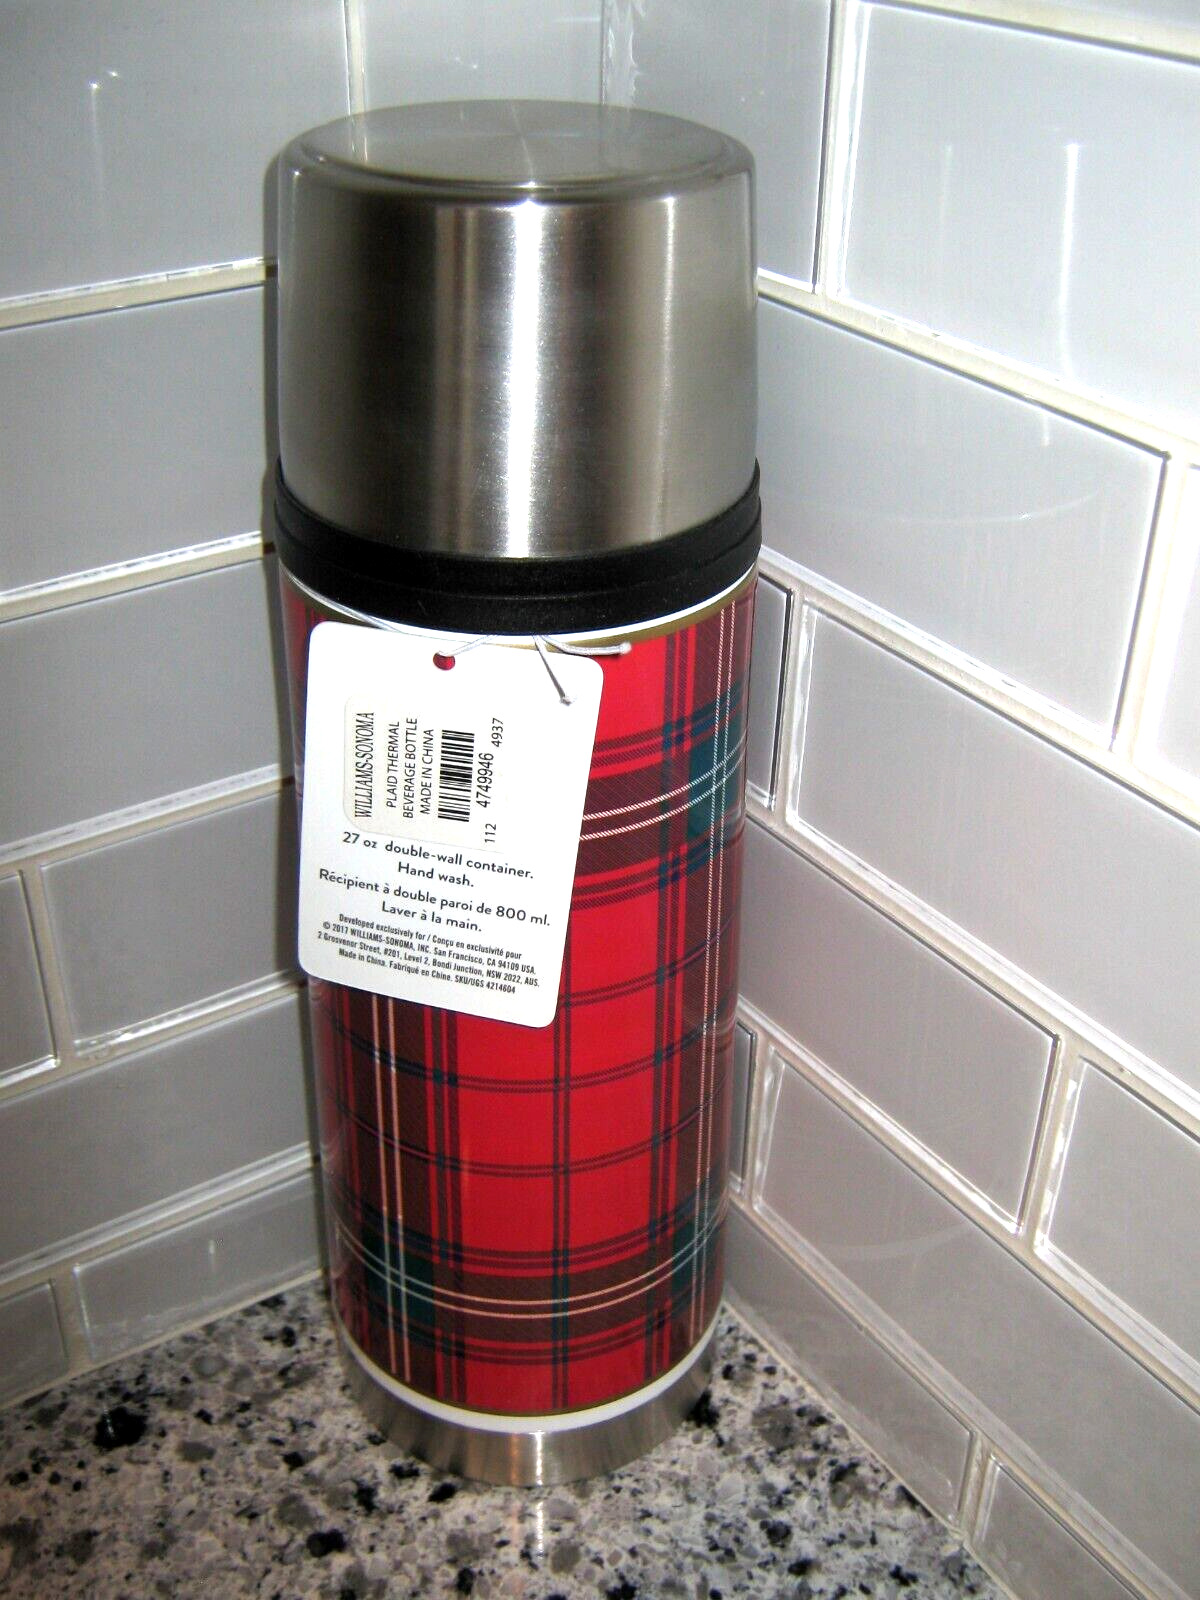 Plaid Williams-Sonoma thermos, 27 oz, Insulated beverage container, NOS, NWT.